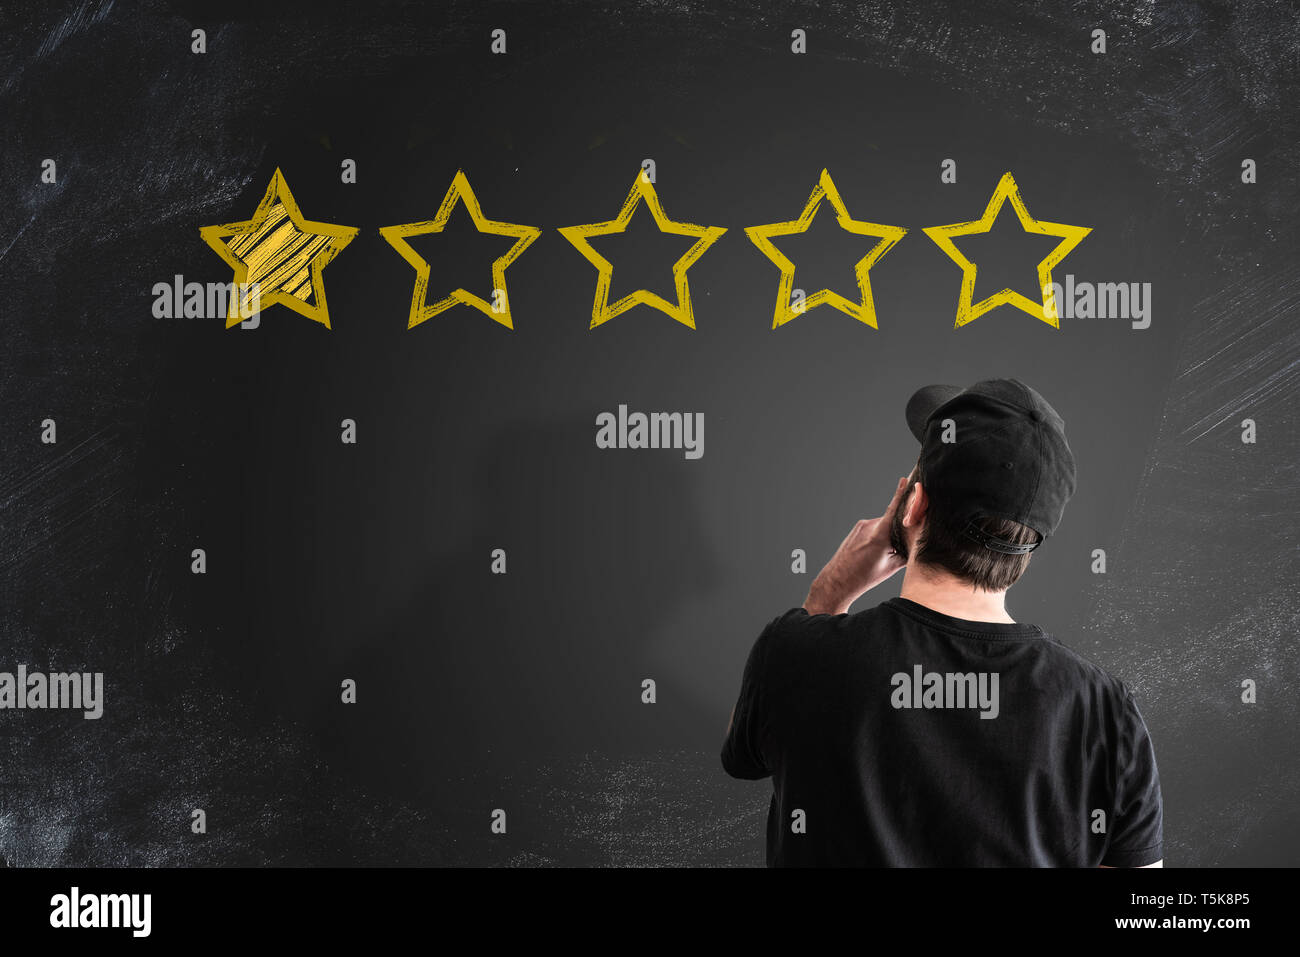 negative service rating or customer feedback concept with stars on blackboard Stock Photo